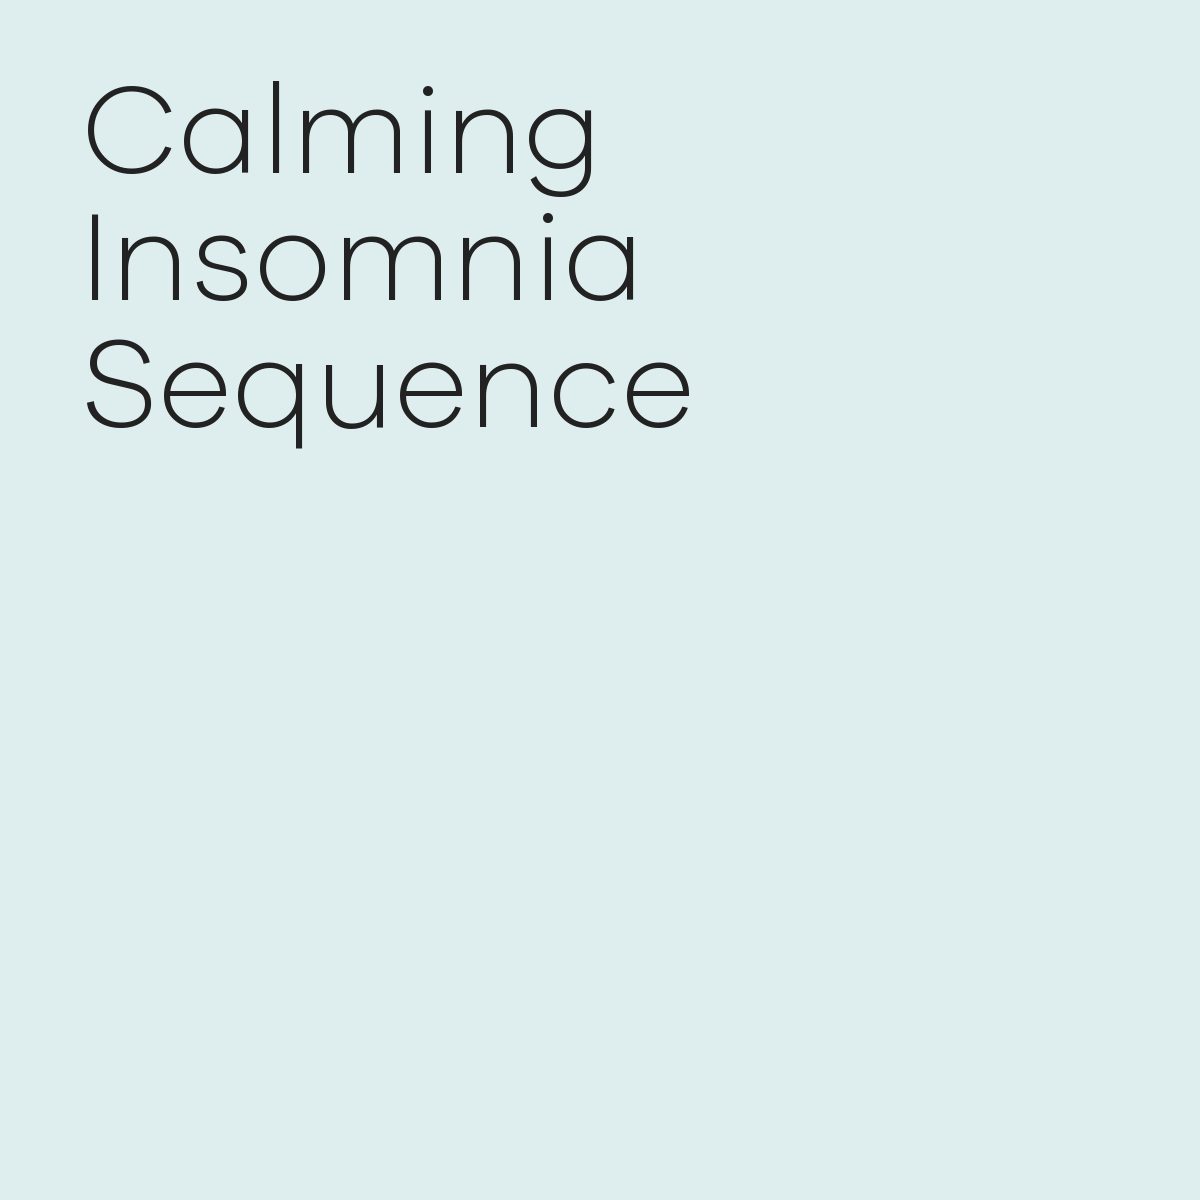 Calming insomnia sequence